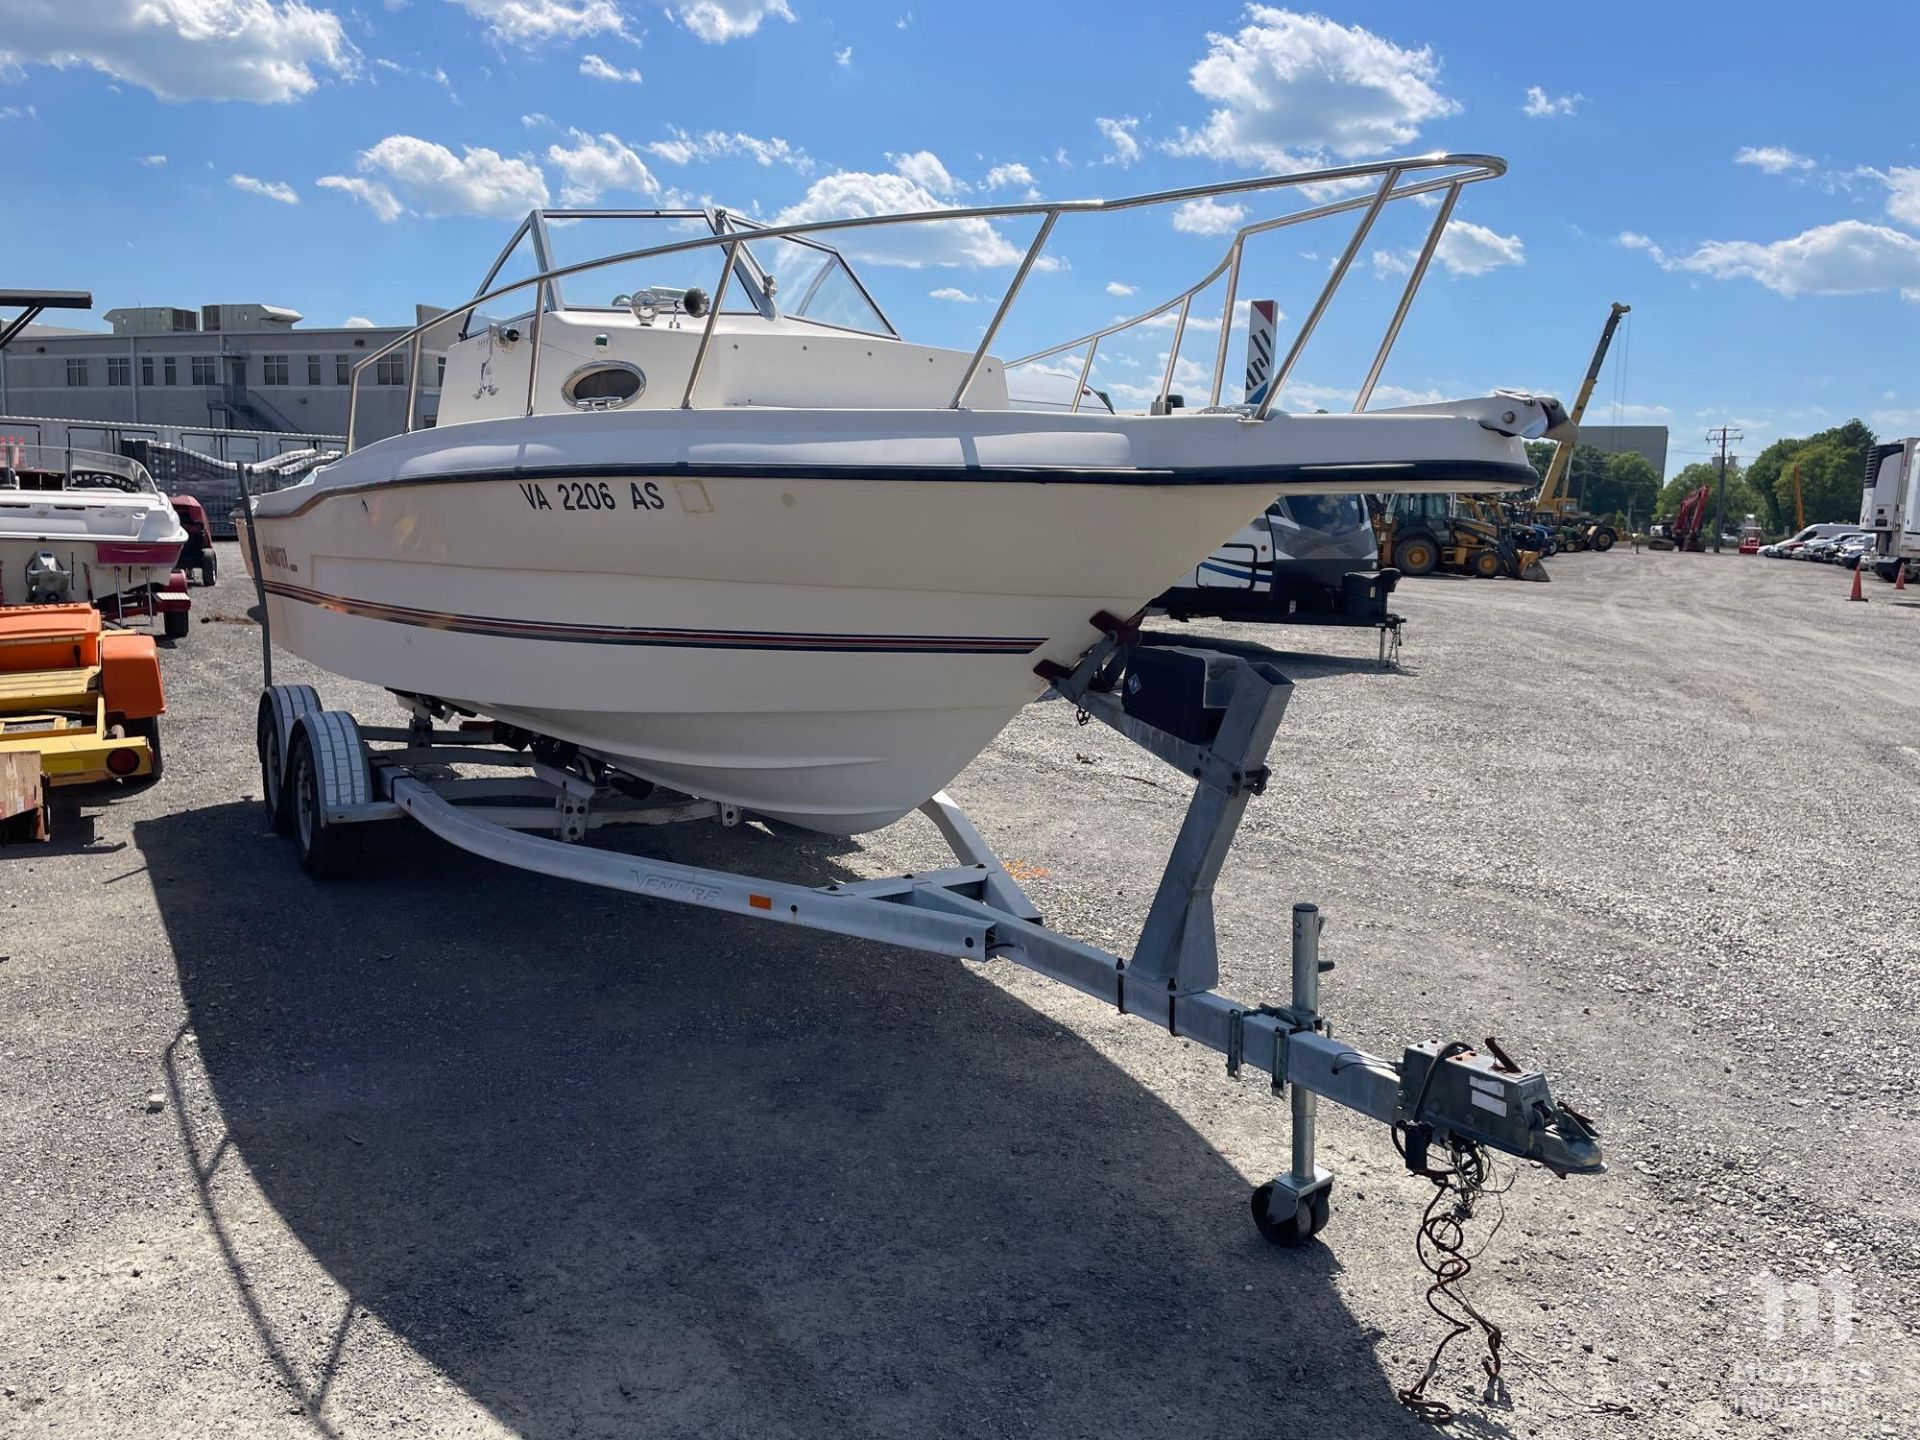 1997 Sea Master 24.4' Boat With Venture Trailer - Image 2 of 13